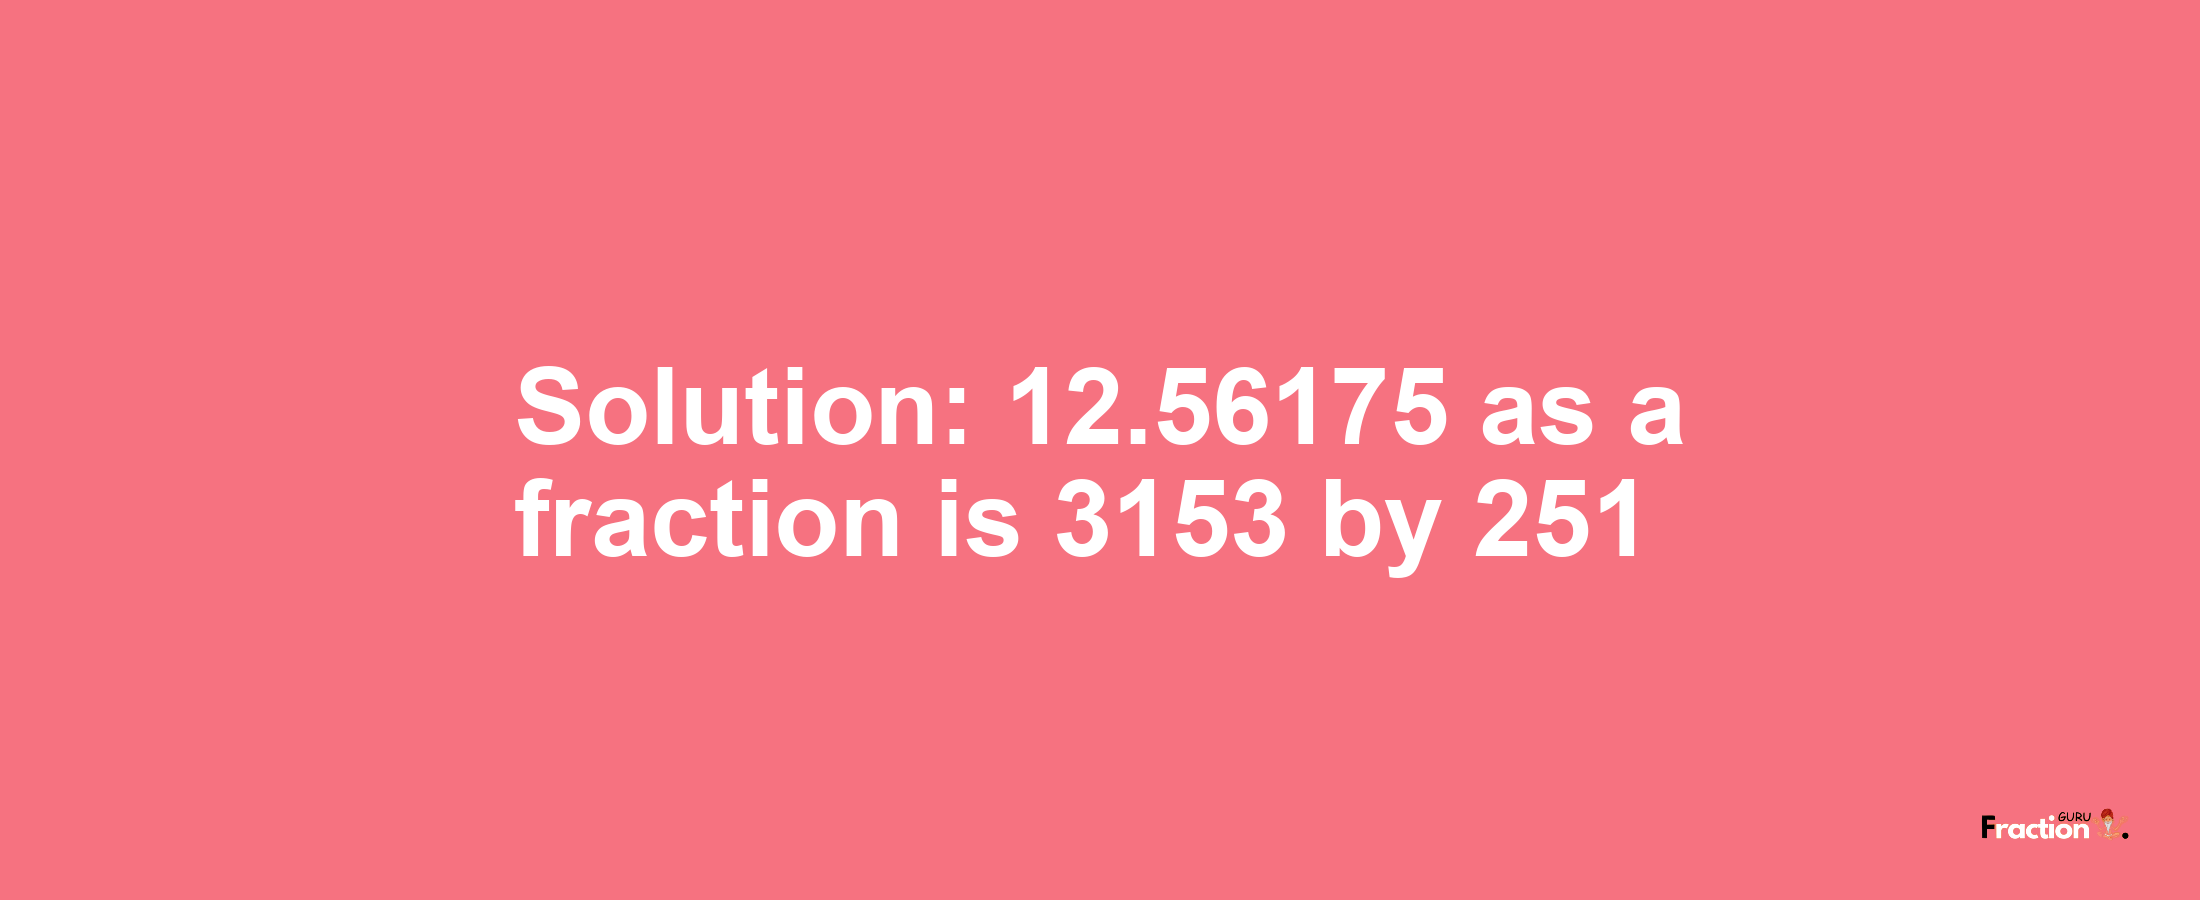 Solution:12.56175 as a fraction is 3153/251